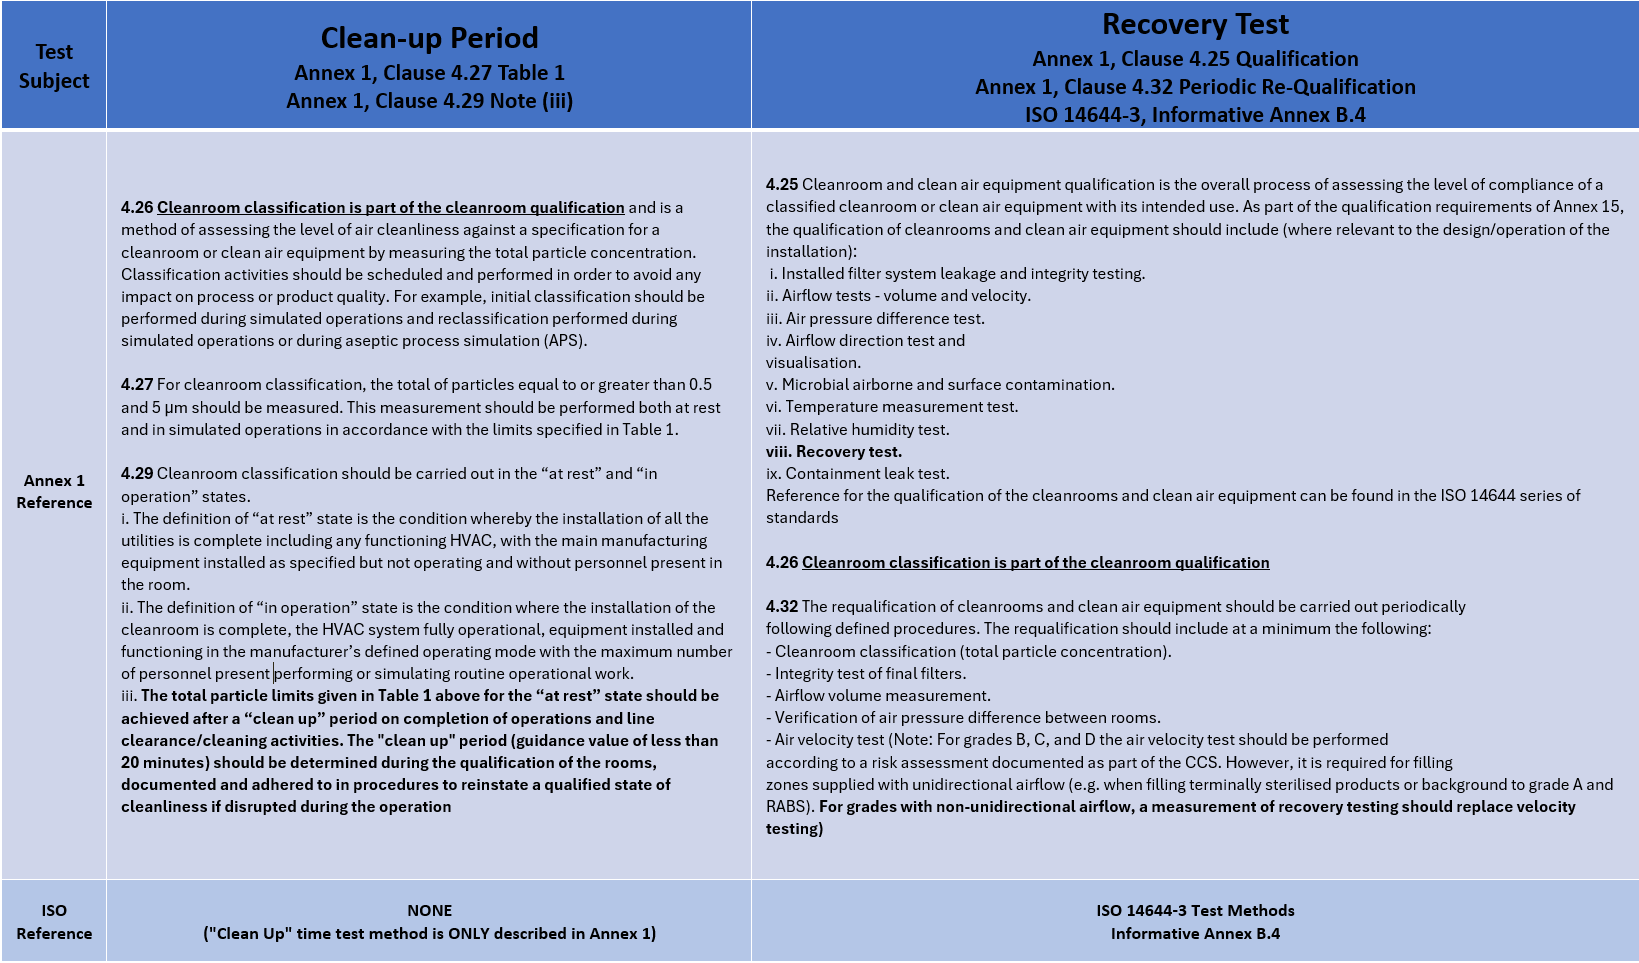 Table 1: Comparative overview of Recovery Test and Clean-Up Test according to Annex 1 and ISO 14644-3